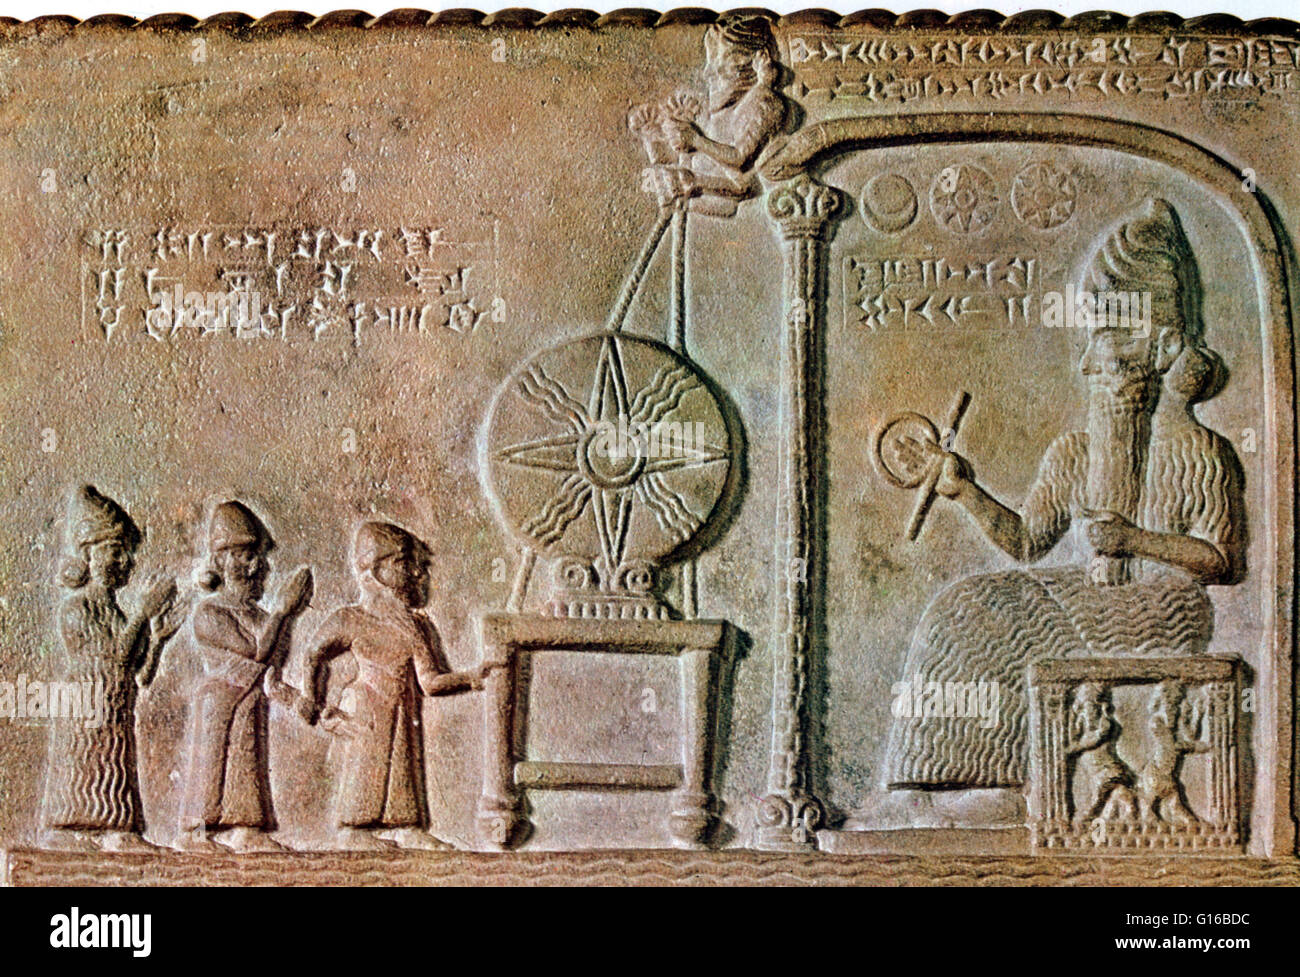 The Tablet of Shamash is a stone tablet recovered from the ancient Babylonian city of Sippar in southern Iraq in 1881. It is dated to the reign of King Nabu-apla-iddina circa 888-855 BC. The bas-relief on the top of the obverse shows Shamash, the Sun God, Stock Photo